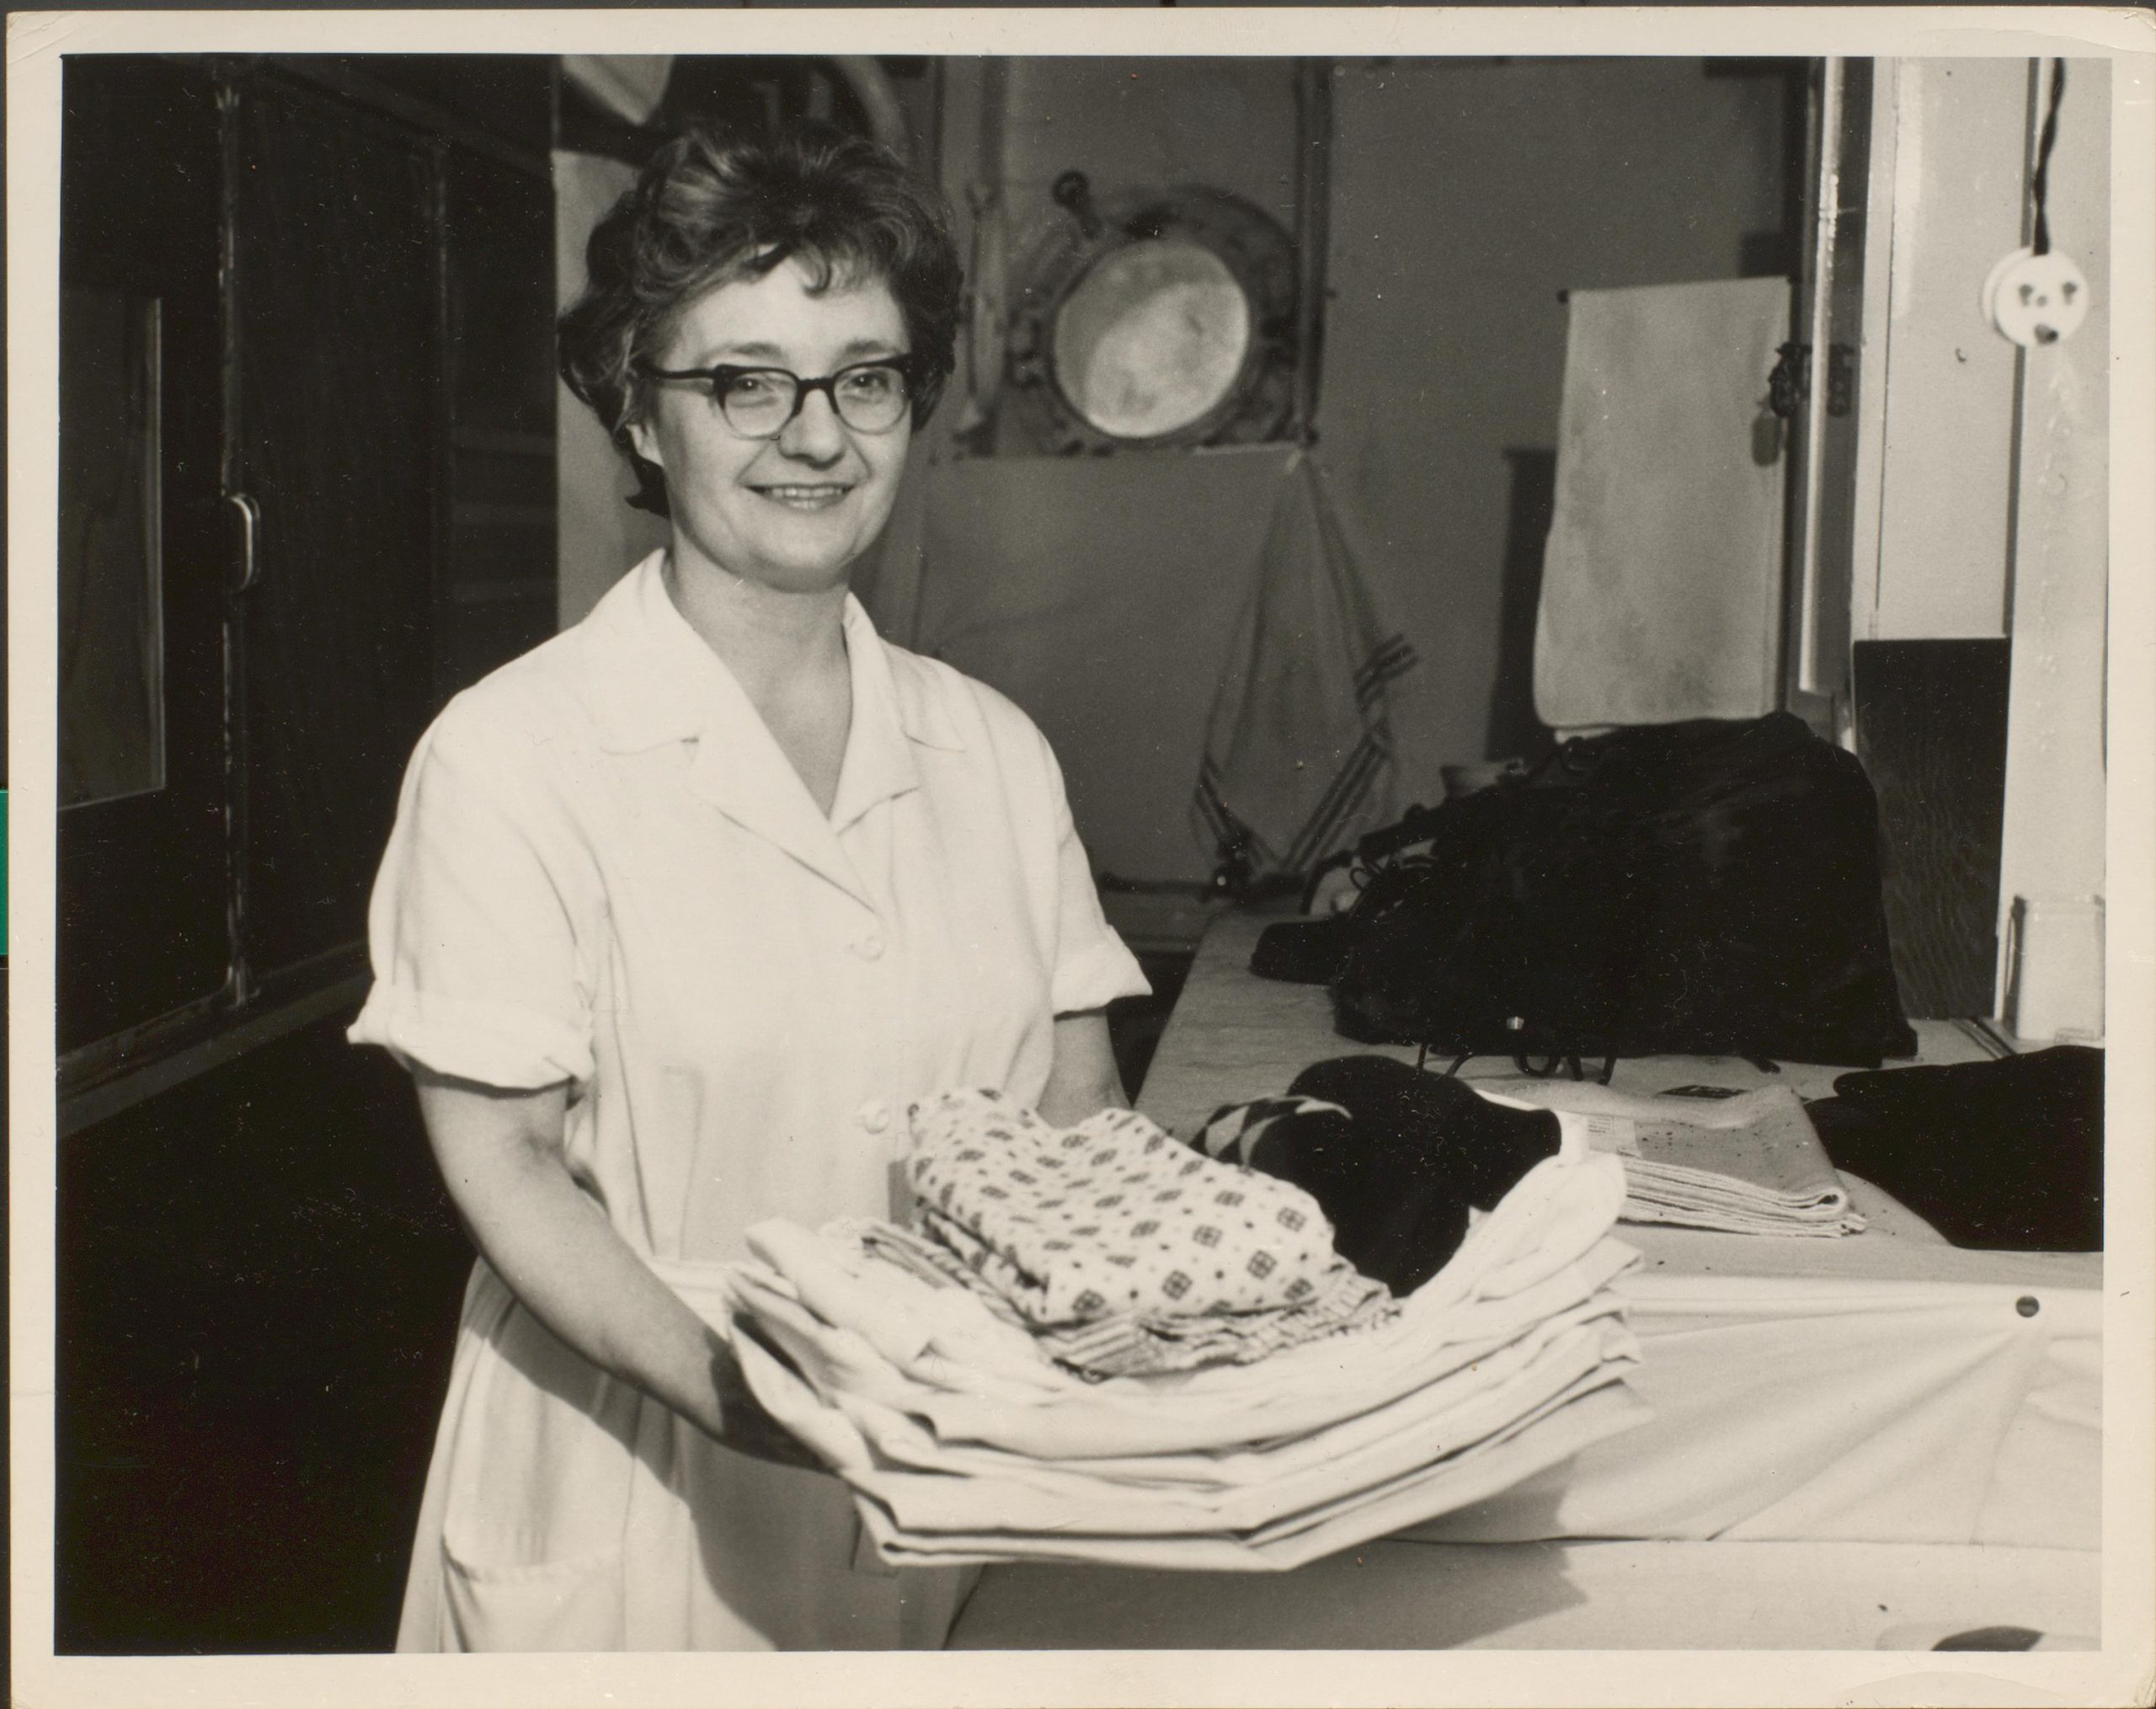 Black and white photograph of female in uniform carrying a pile of folded laundry.